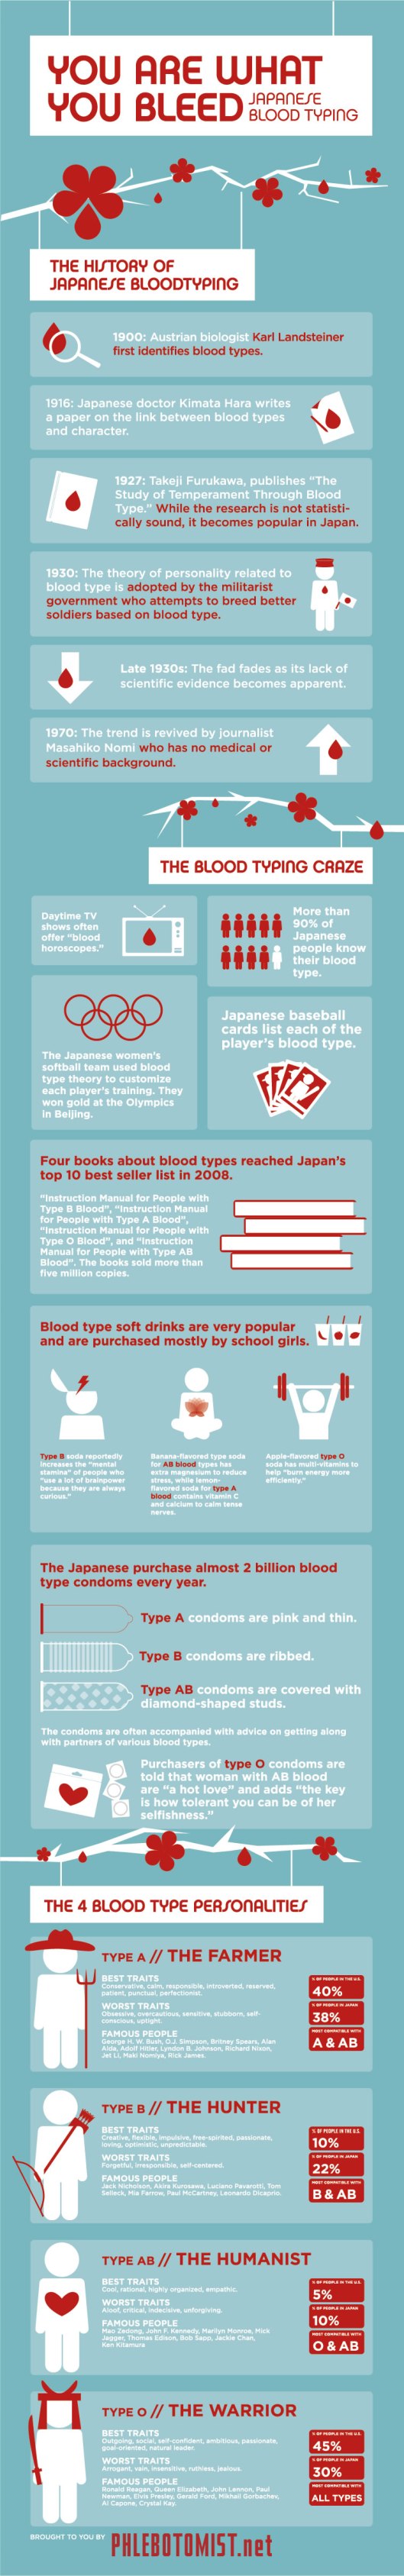 japanese-bloodtyping-infographic